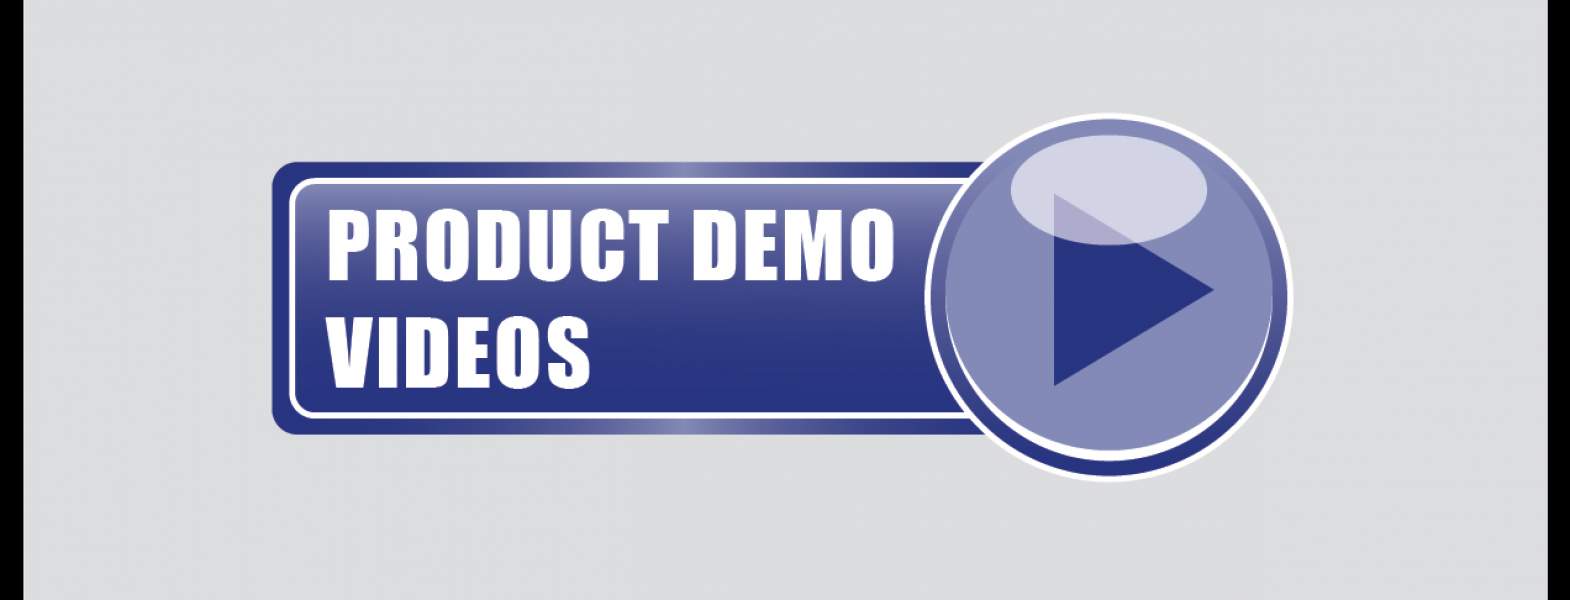 View Product Instruction / Demonstration Videos